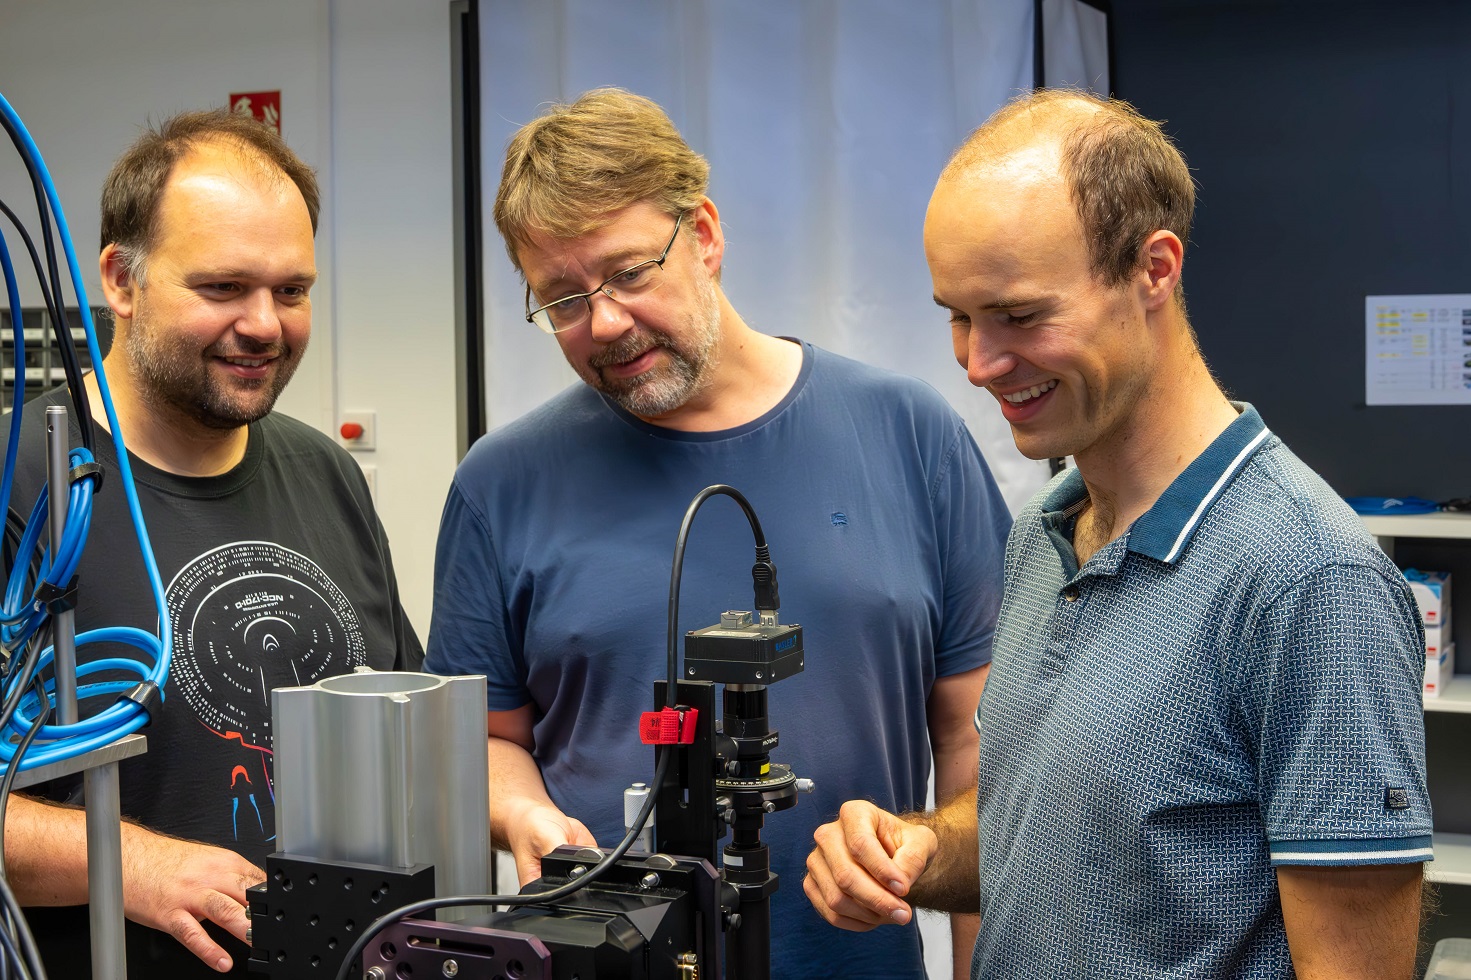 Matthias Heinrich, Alexander Szameit and Max Ehrhardt - the authors of the Science paper - experimenting with photonic circuits